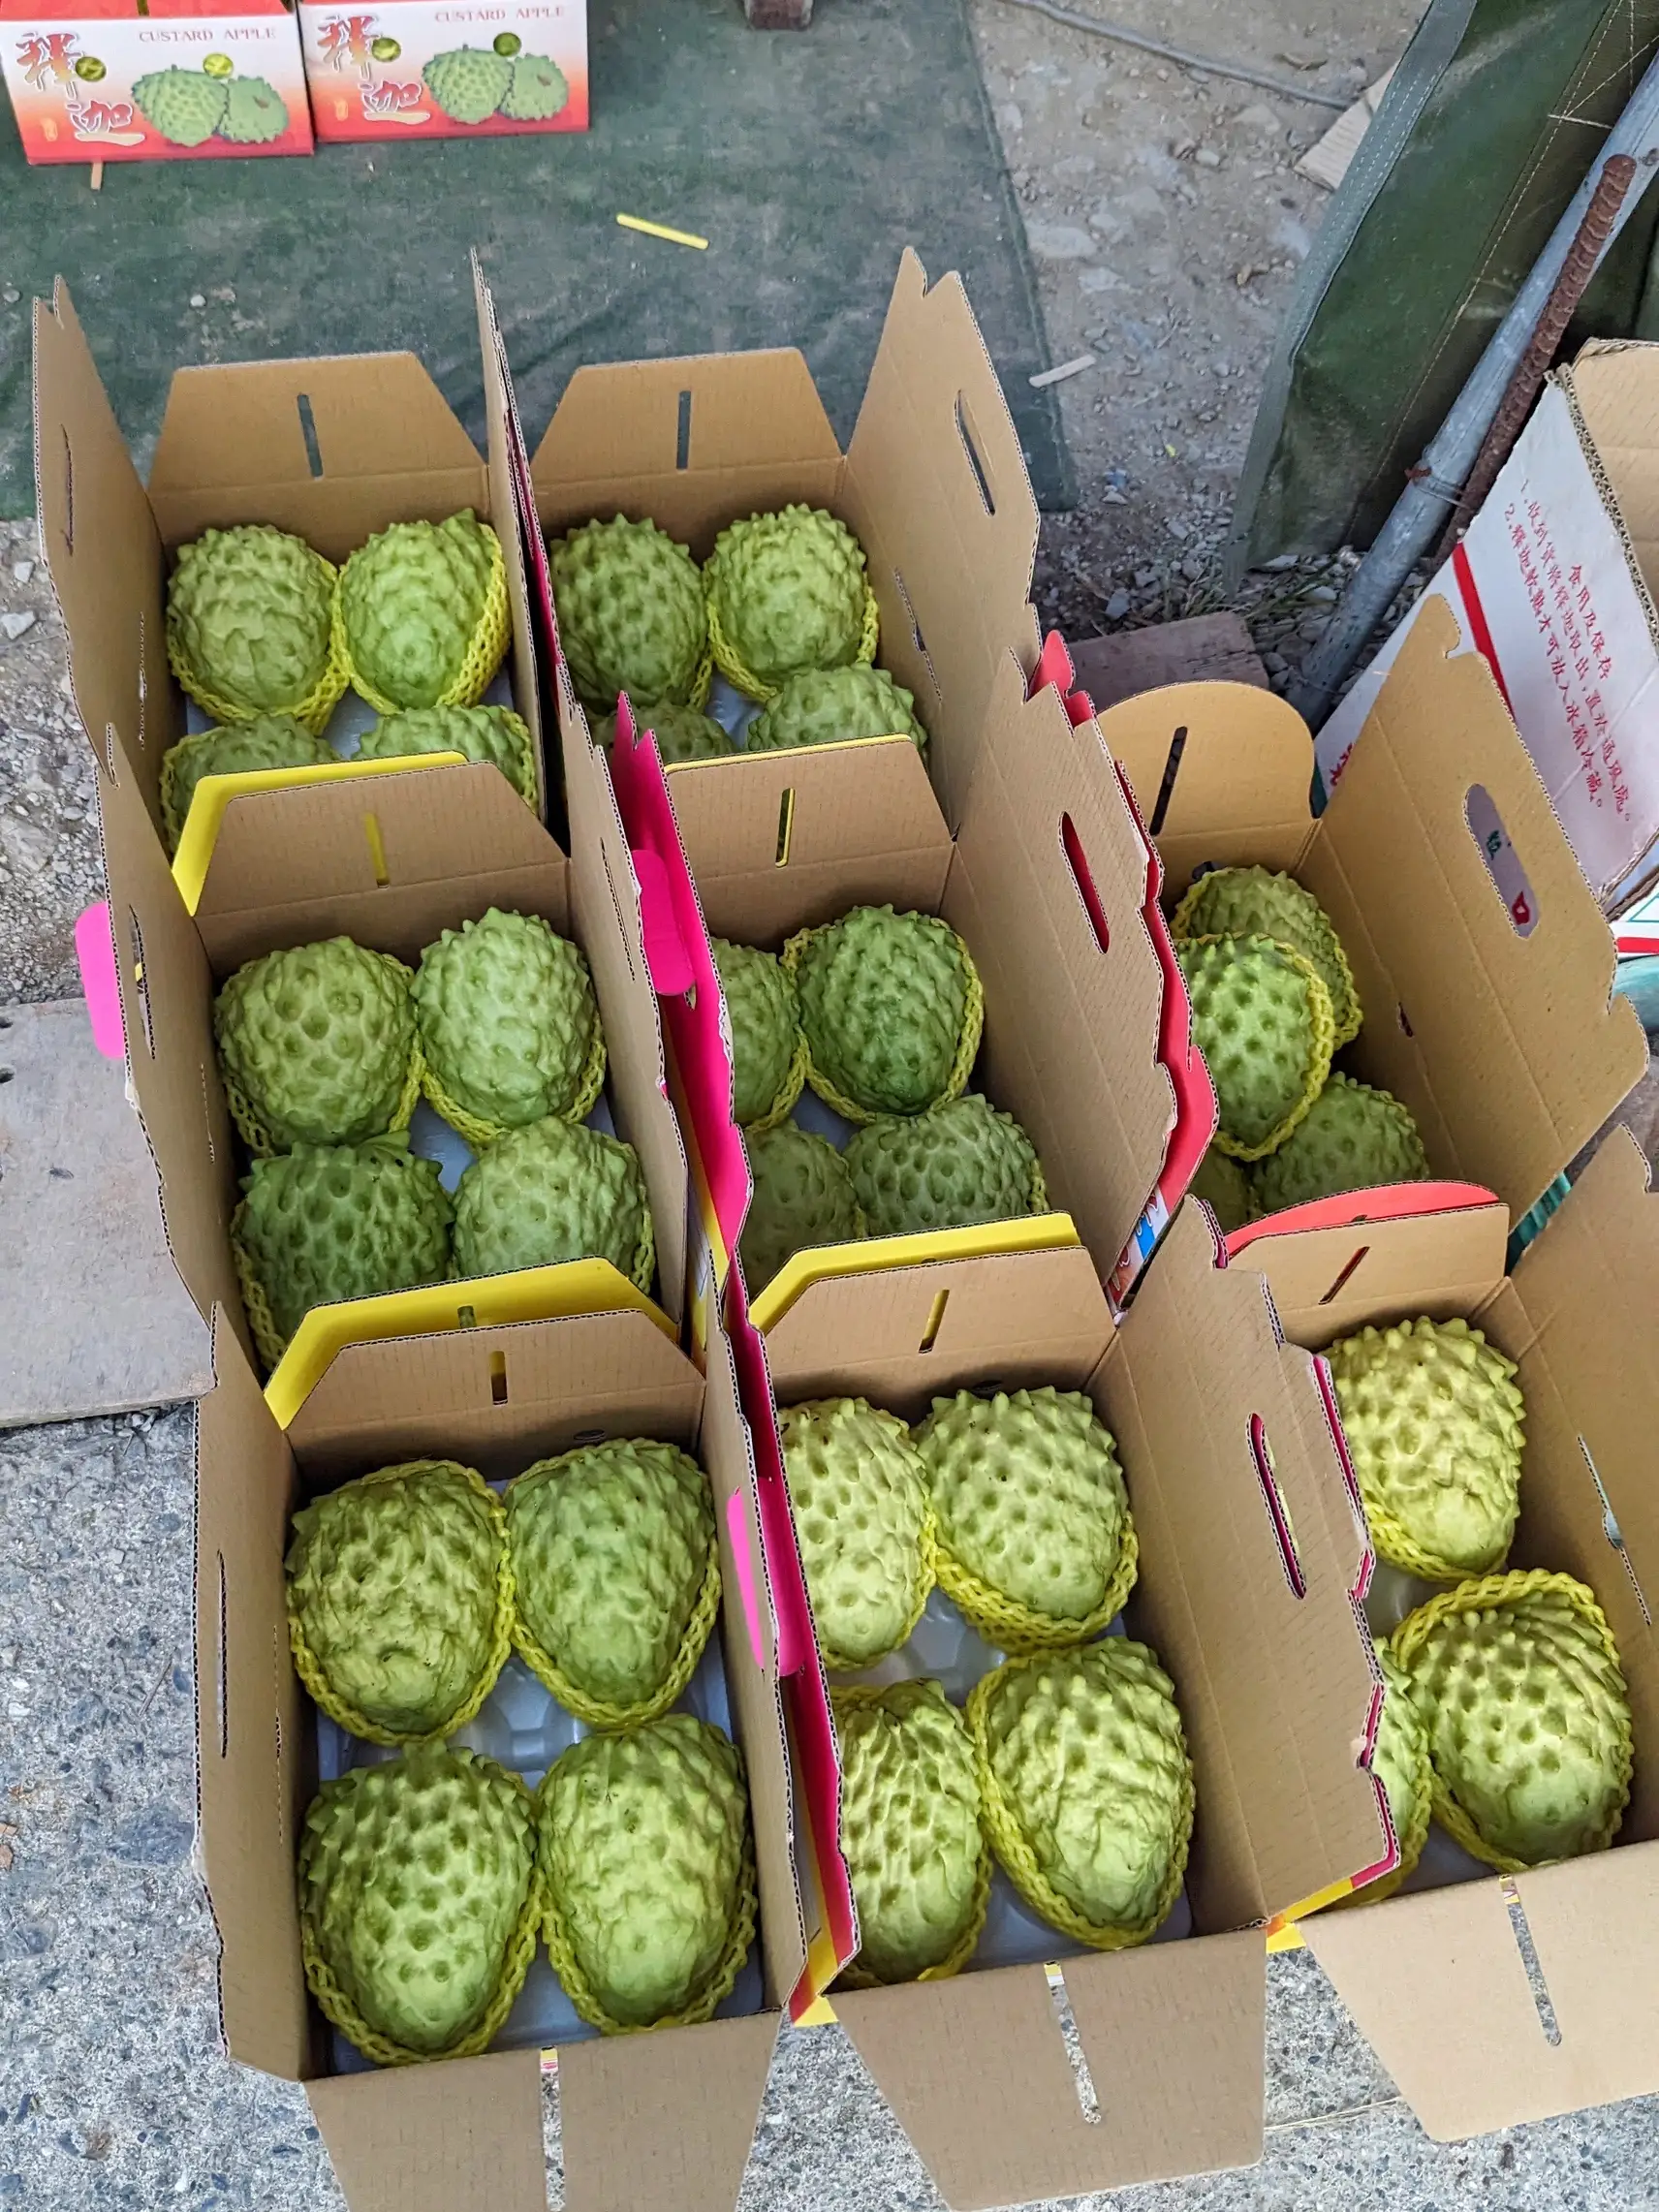 Custard apples: What the heck are they and why should you eat them?